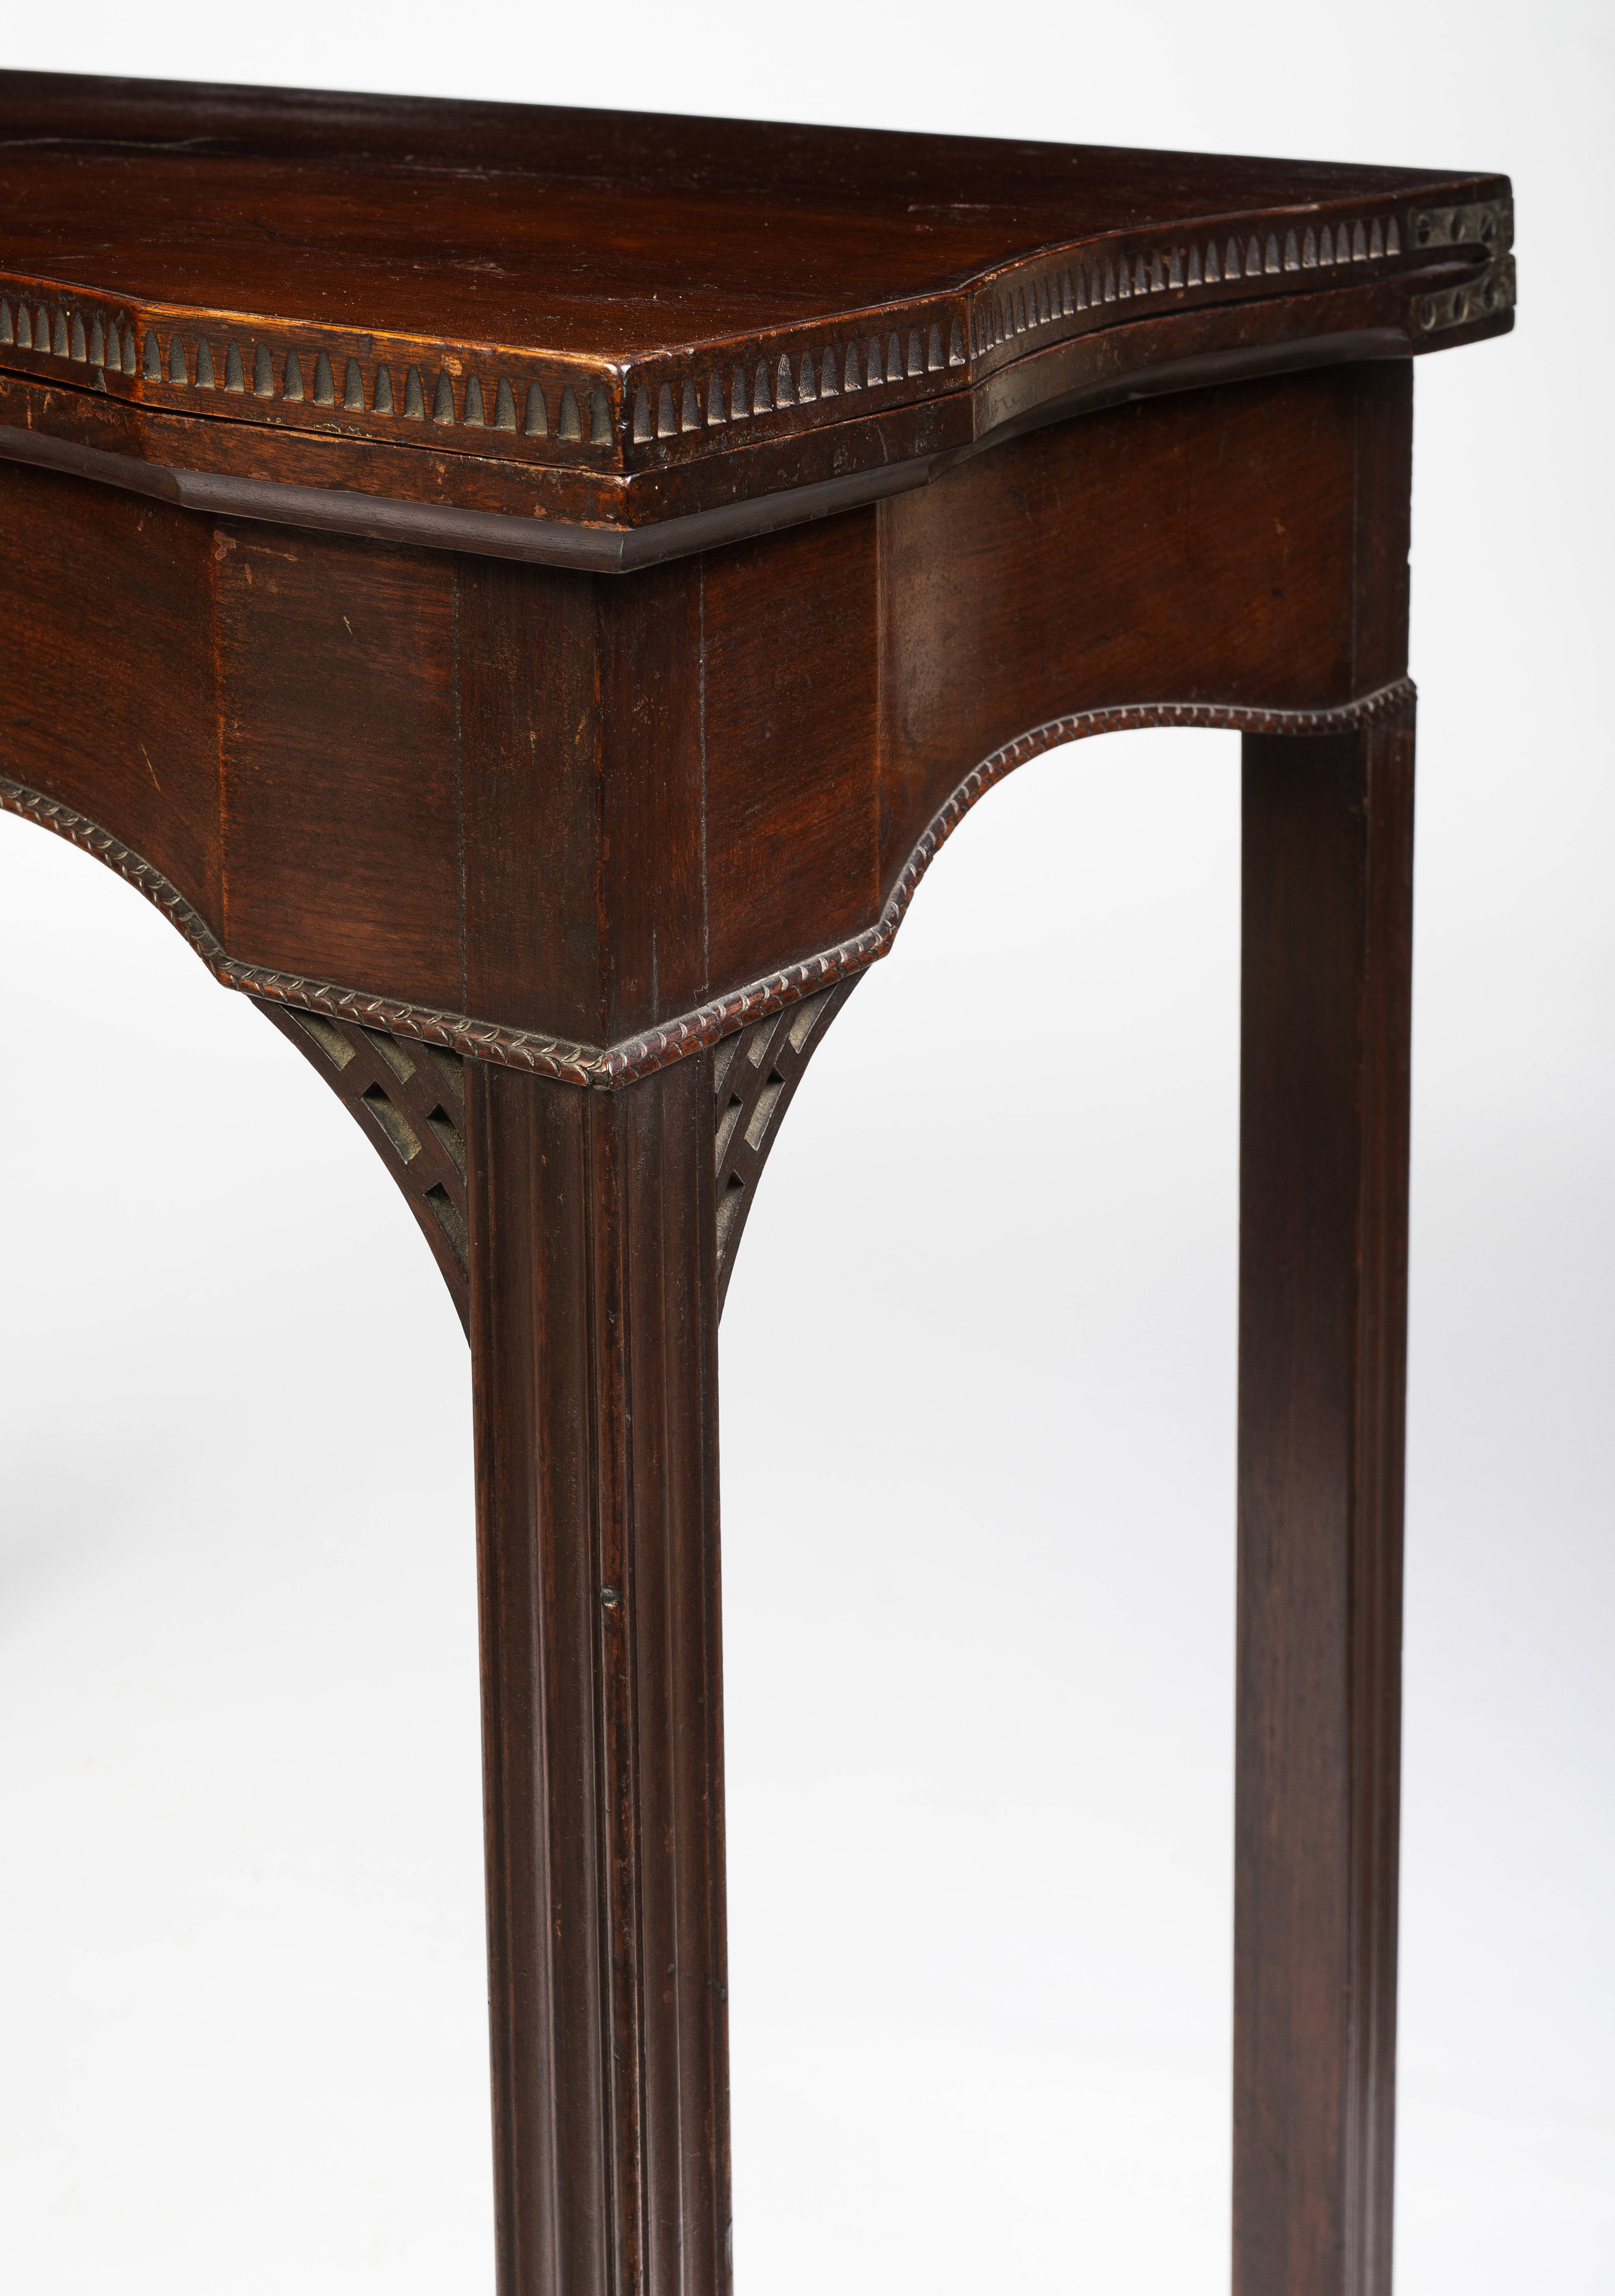 A very fine Chippendale card table